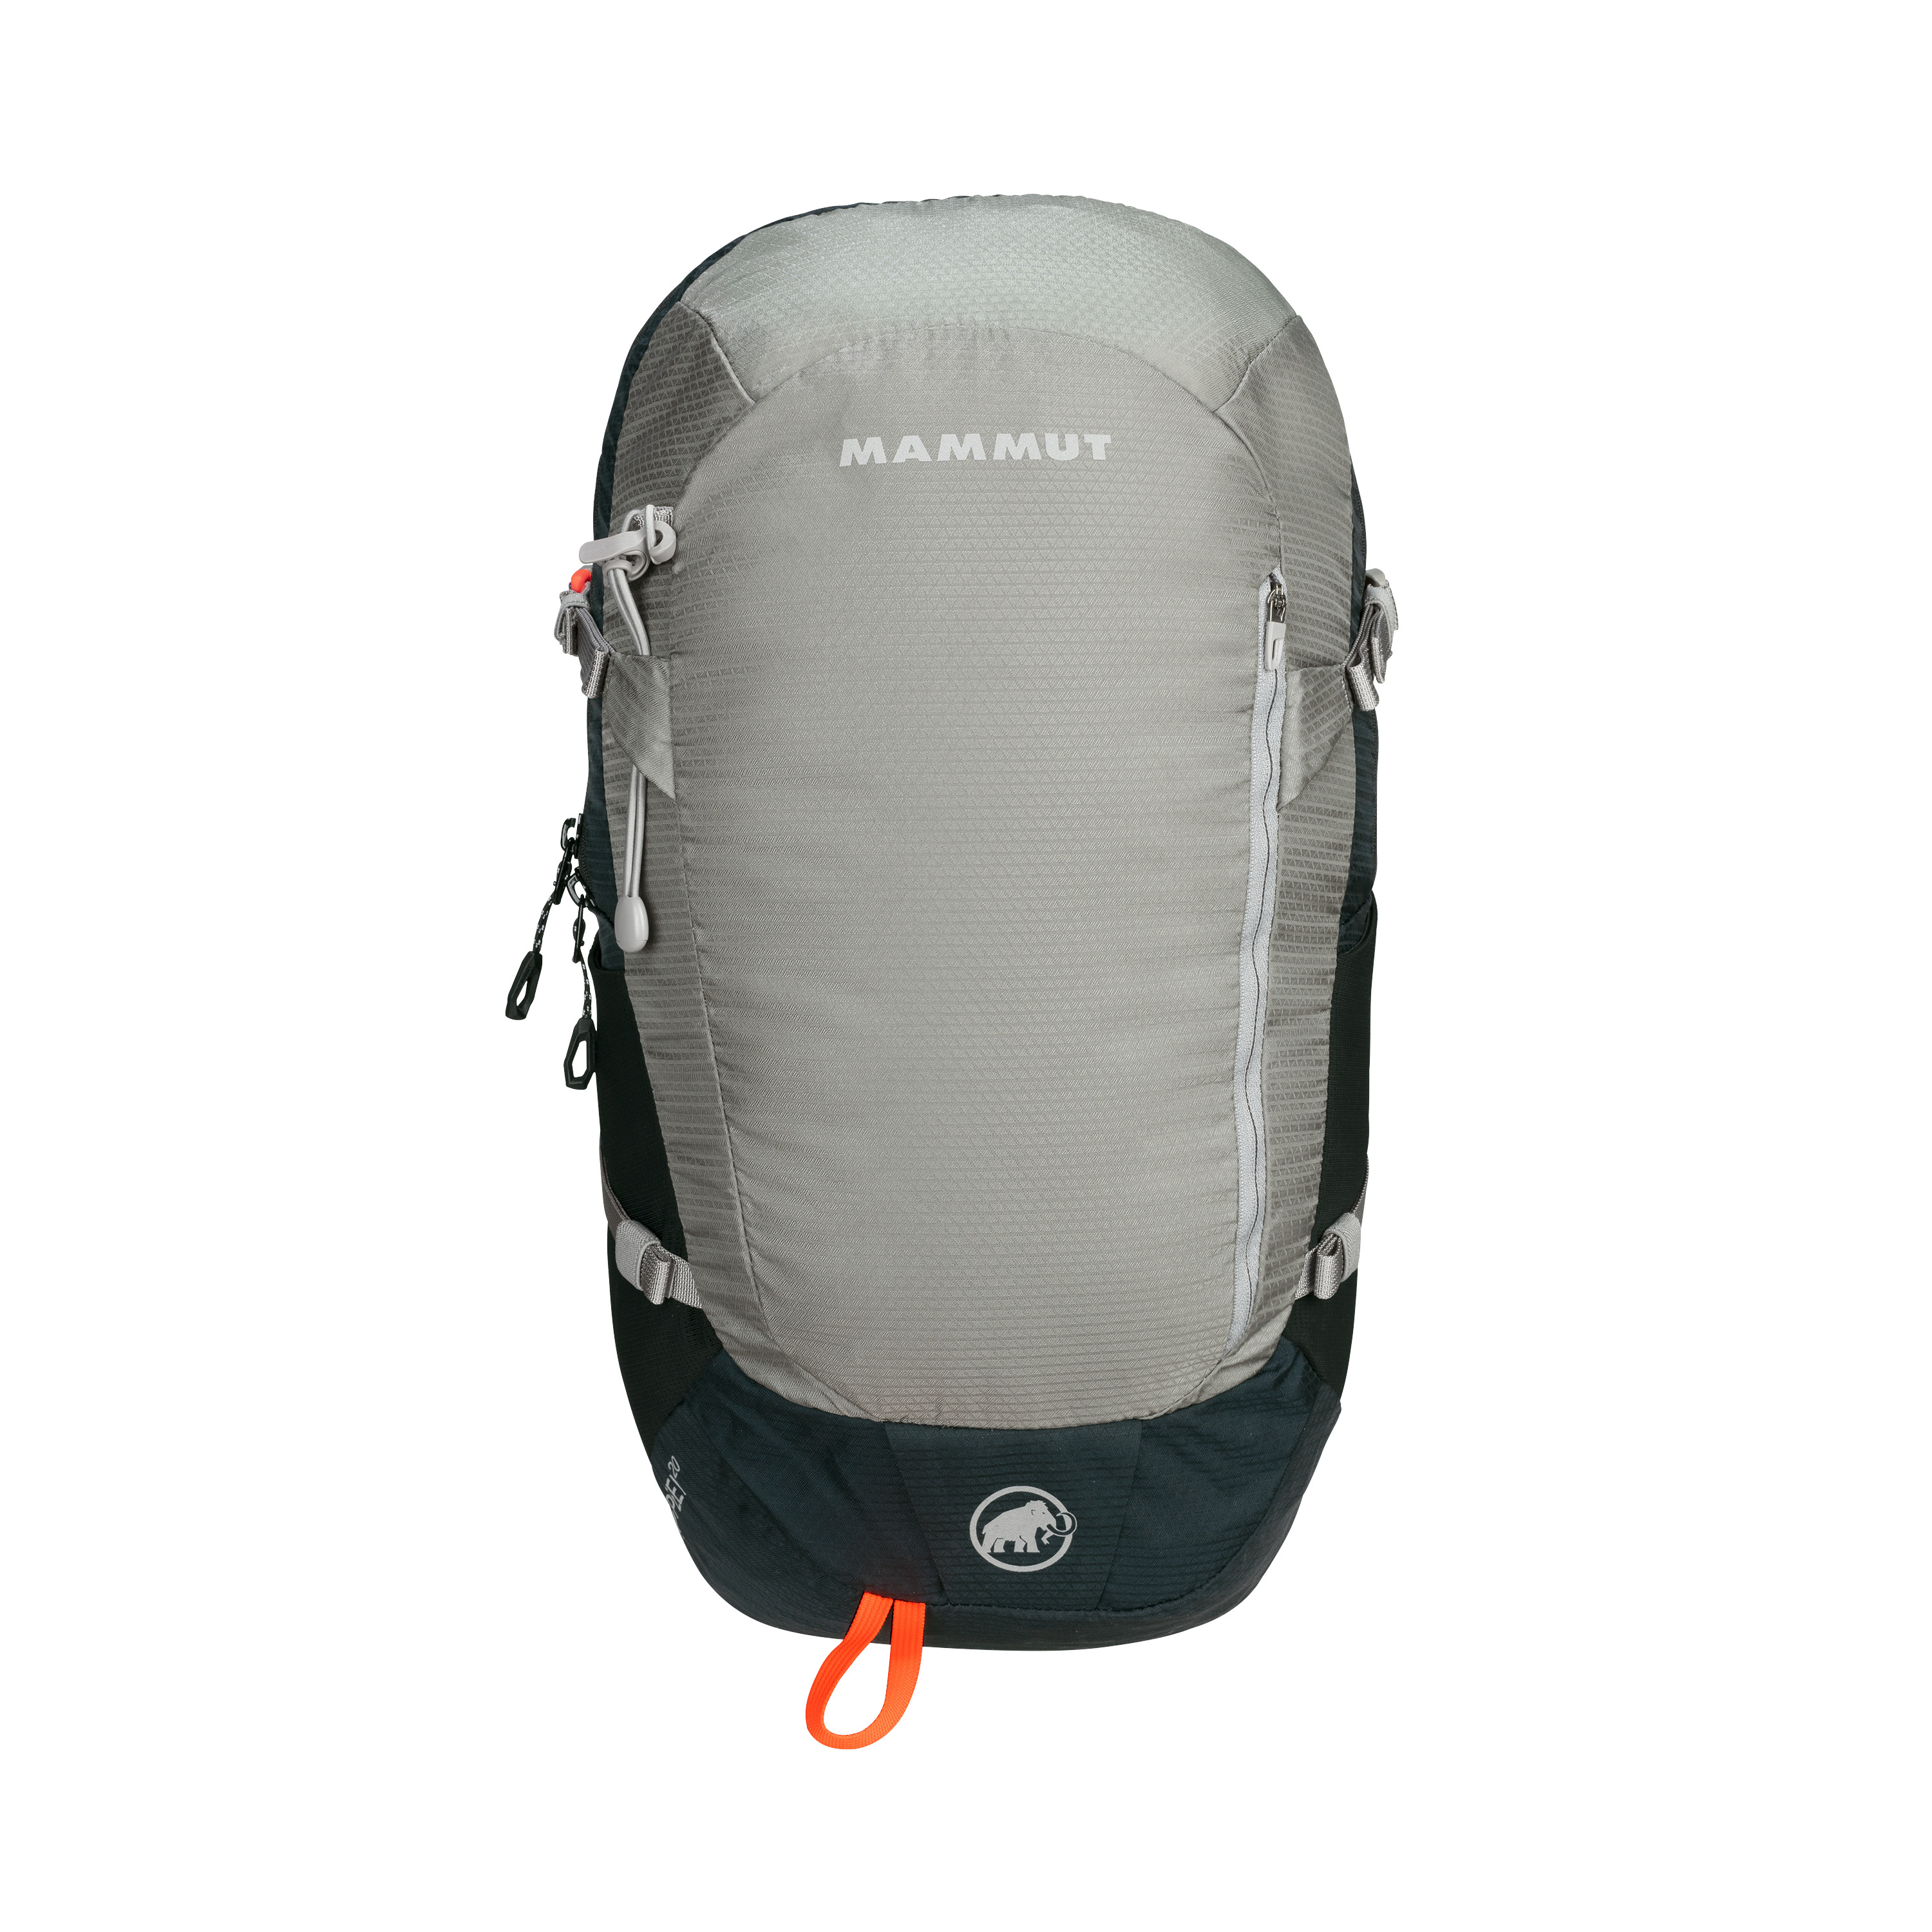 Mammut Lithium Speed Unisex Adults’ Backpack Jay 20 L 2530-03171-50011 